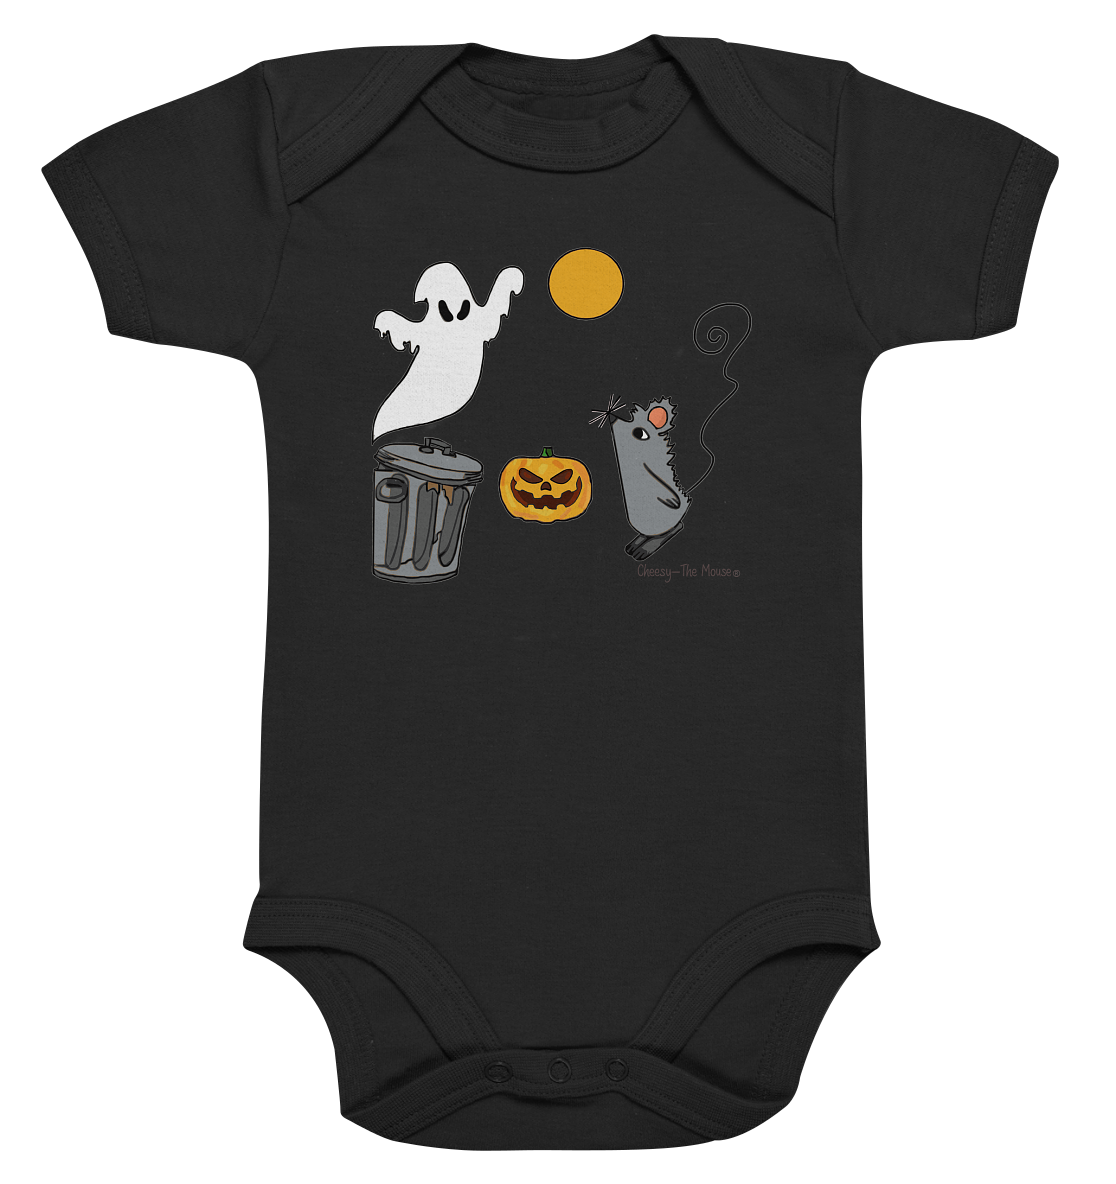 Cheesy -The Mouse® Halloween Midnight Meeting - Organic Baby Bodysuite